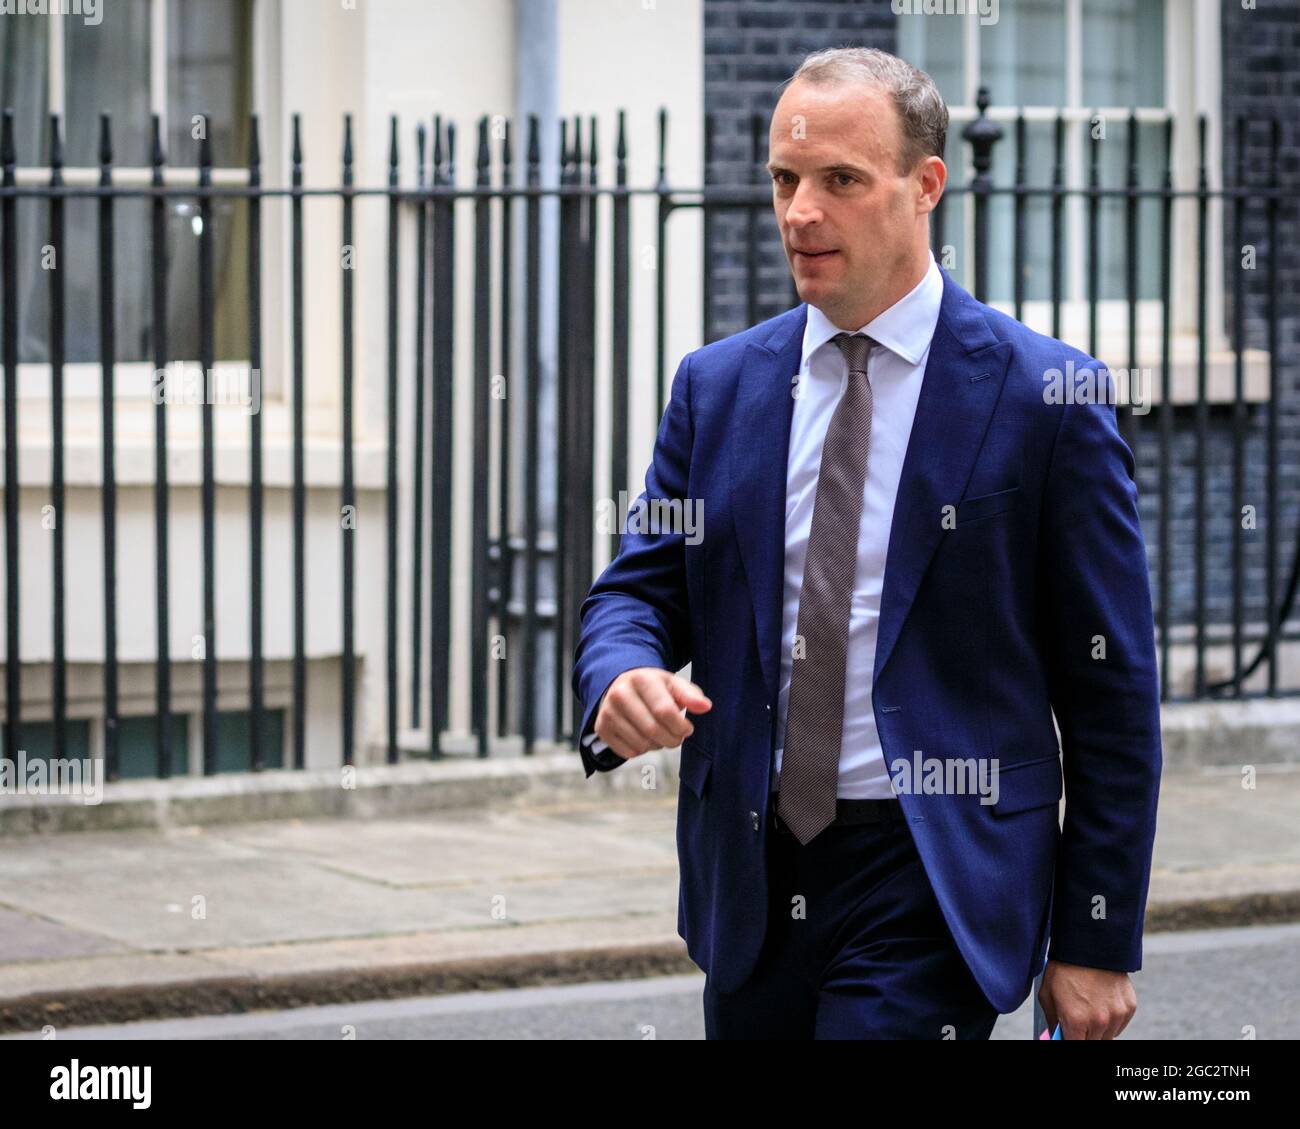 Dominic Raab, MP, Secretary of State for Foreign and Commonwealth Affairs, Conservative Party politician, Downing Street, London, UK Stock Photo